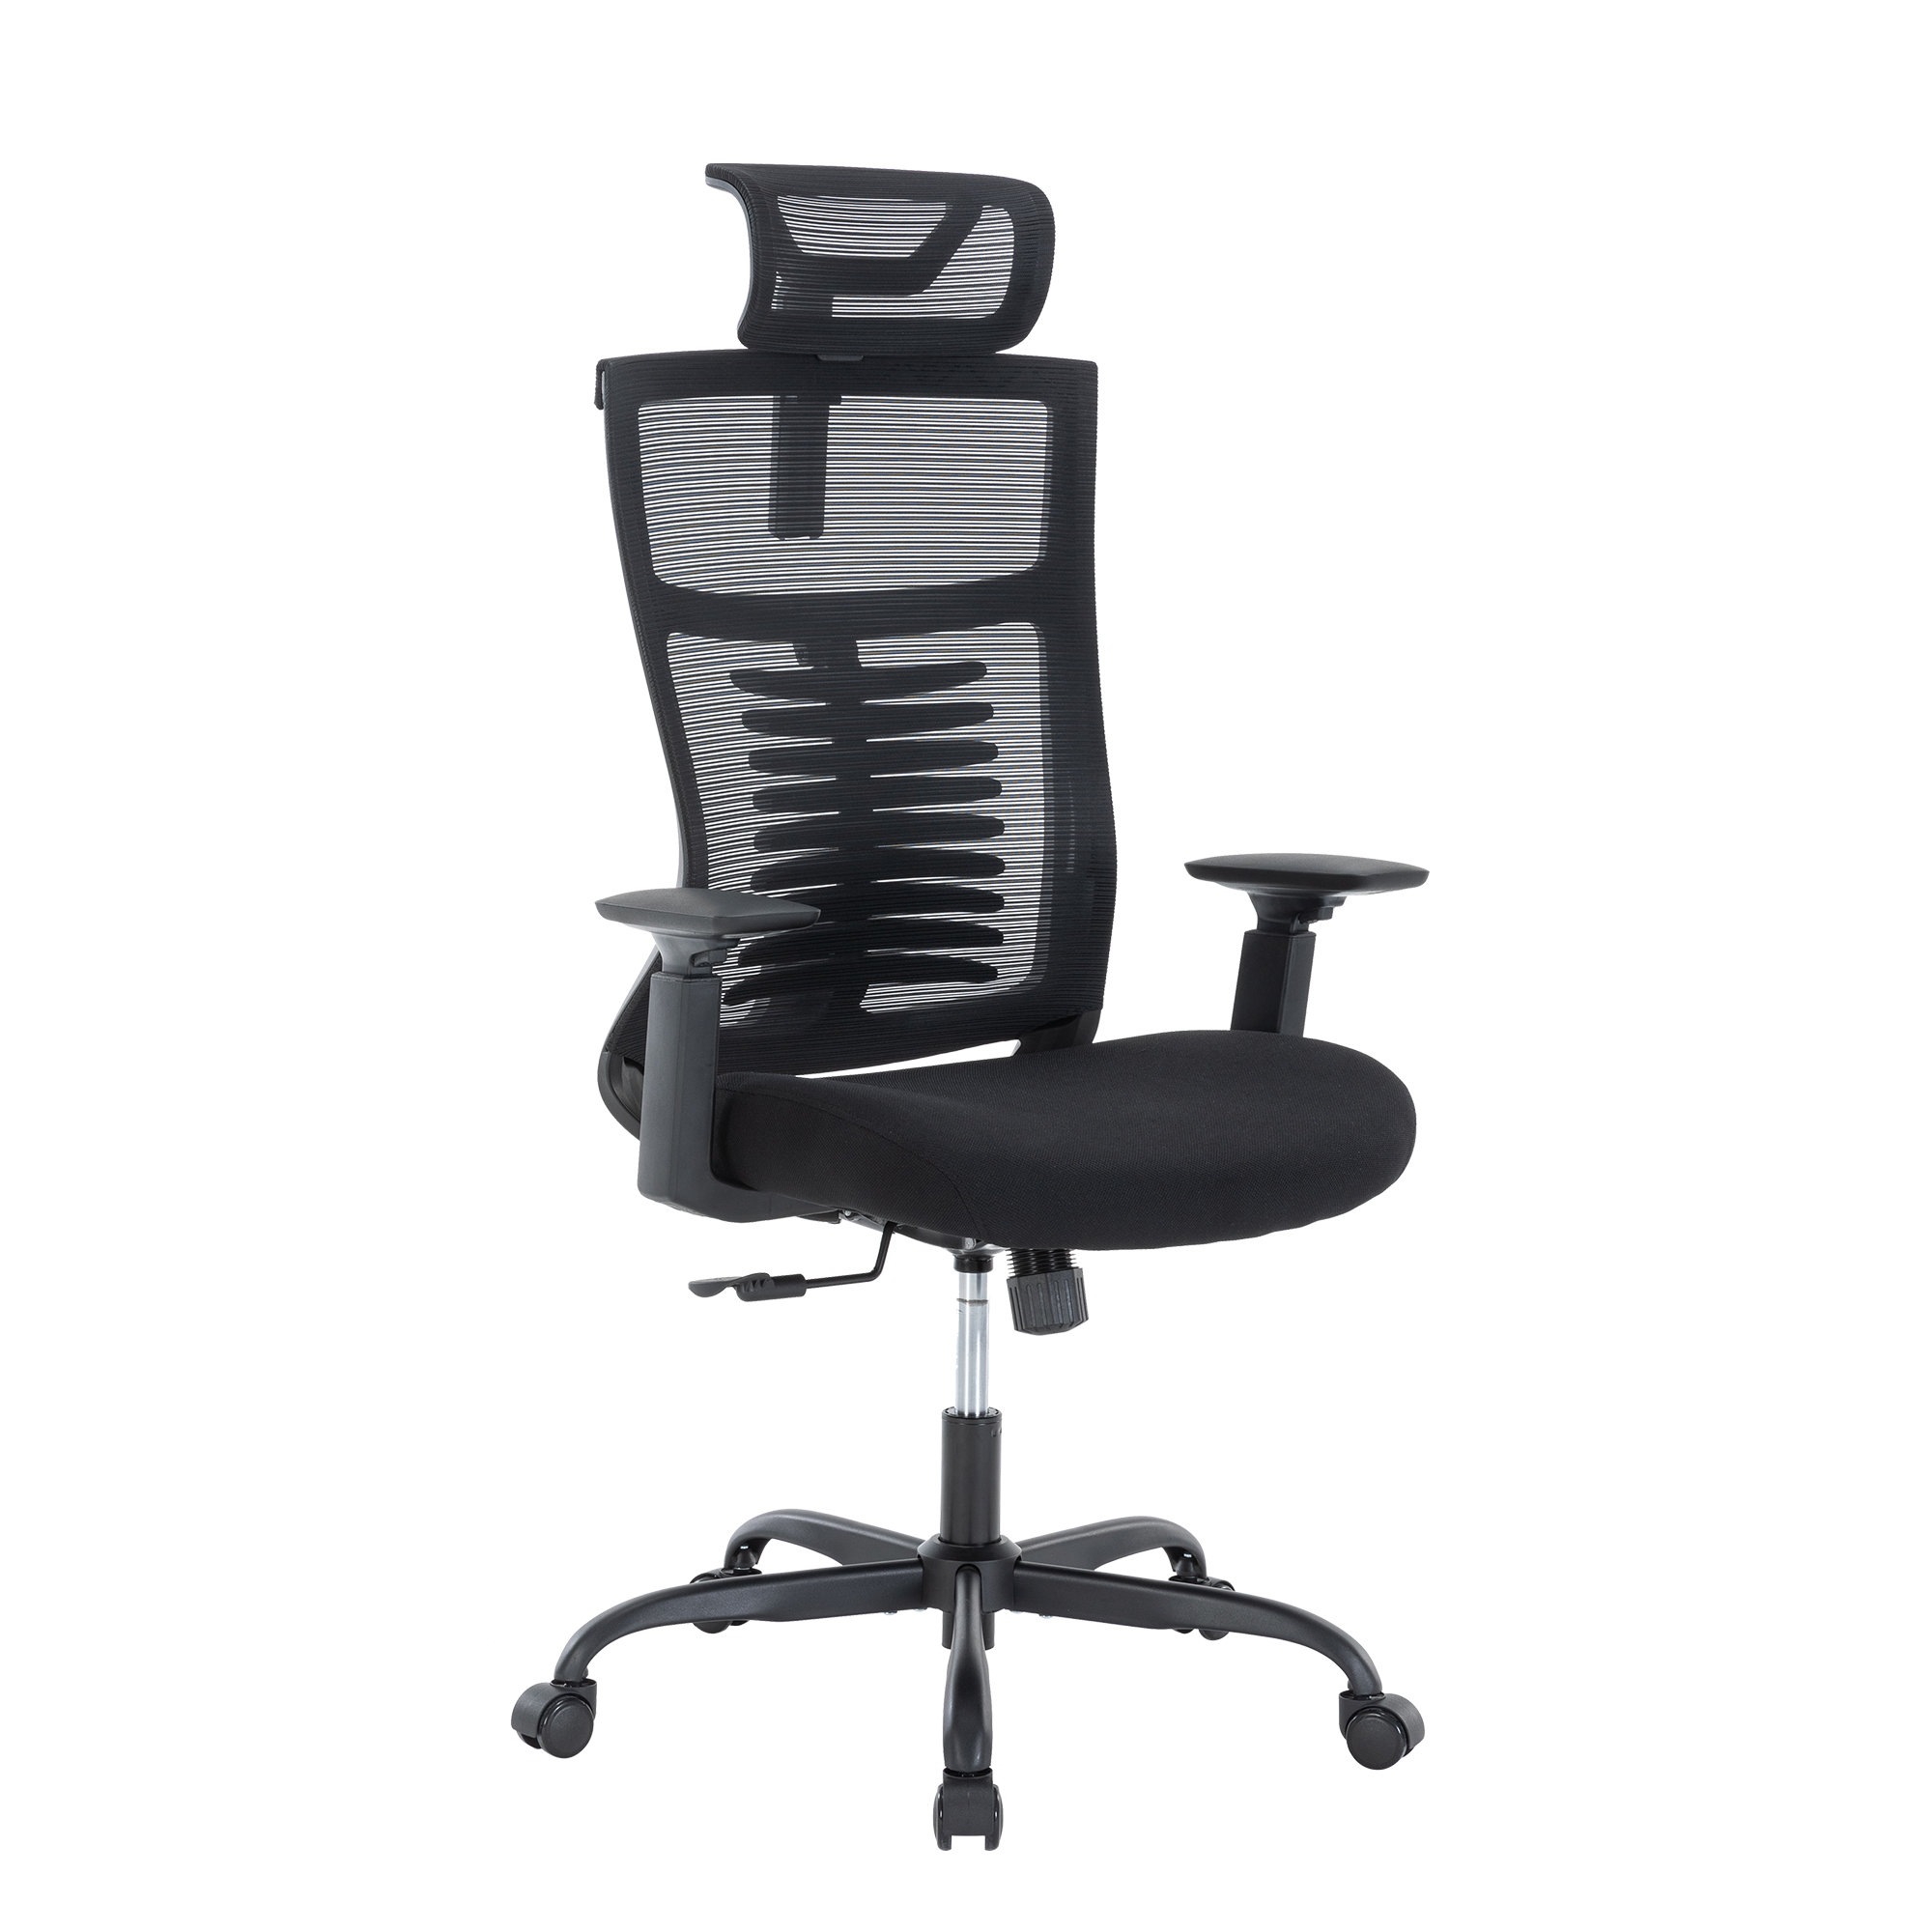 Office Chair, High Back Mesh Chair Ergonomic Home Desk Chair Adjustable Headrest, and Armrest Executive Computer Chair with Hanger and Soft Foam